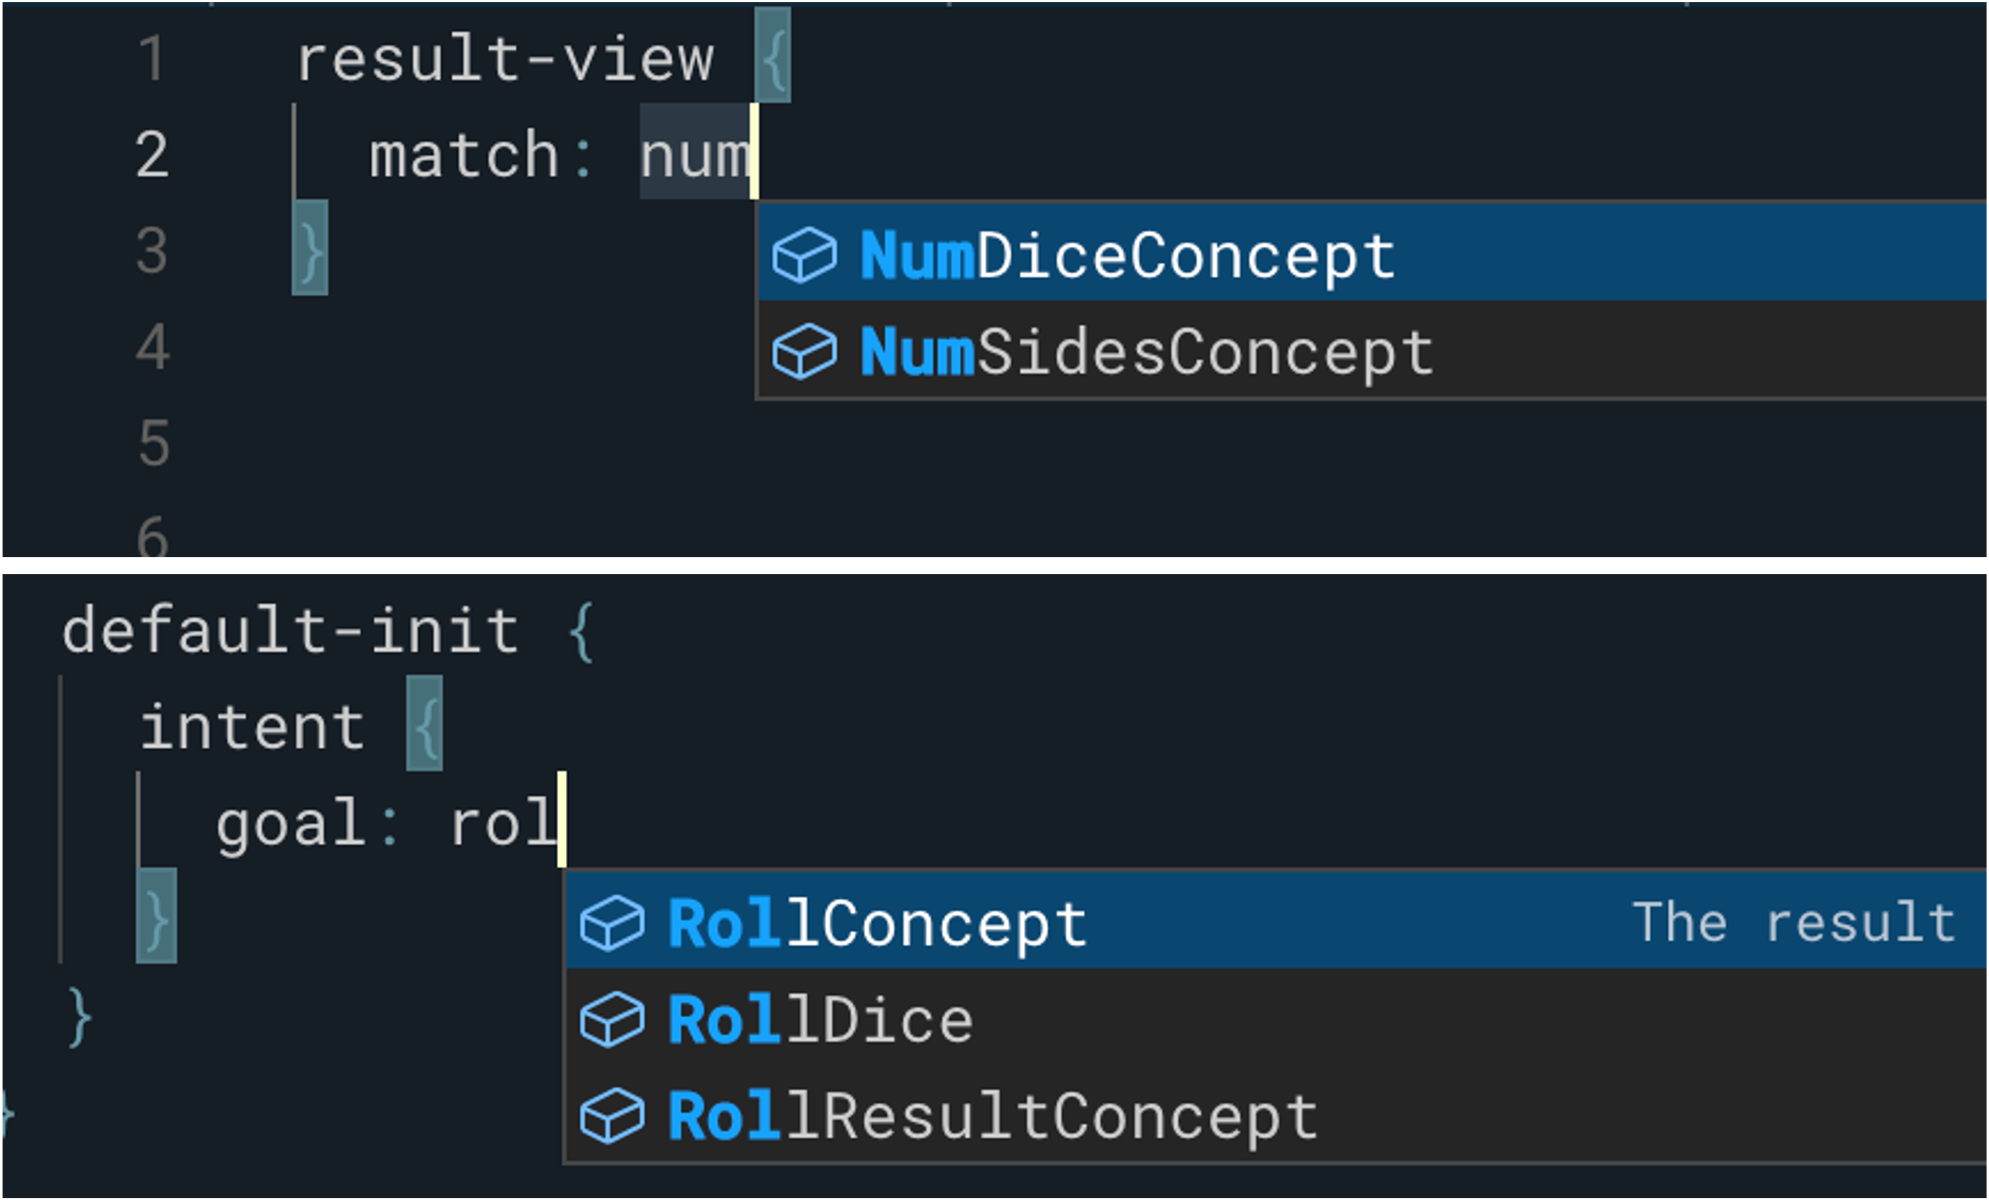 Two examples of autocomplete in the code editor. The top image is giving model name examples in a match key. The bottom image is giving model names in an intent key.